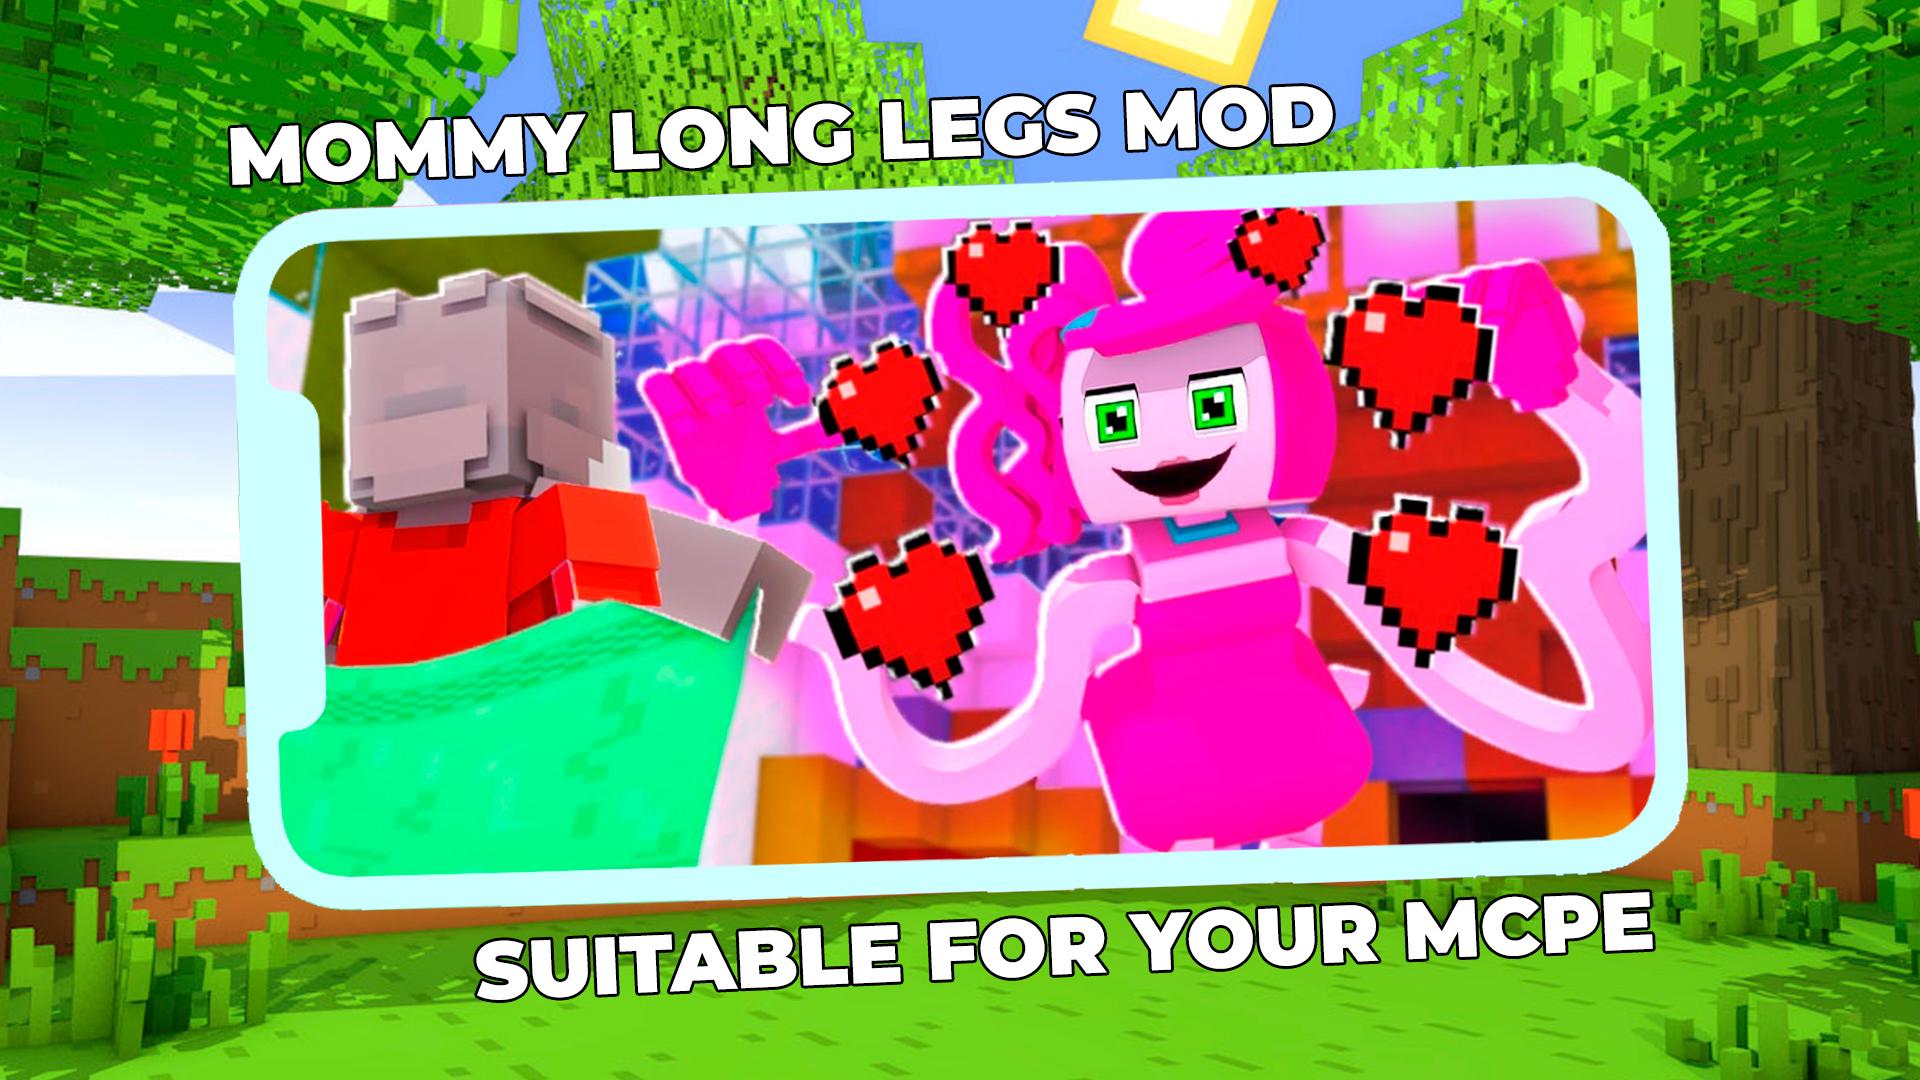 Download Mod Mommy Long Leg Minecraft android on PC